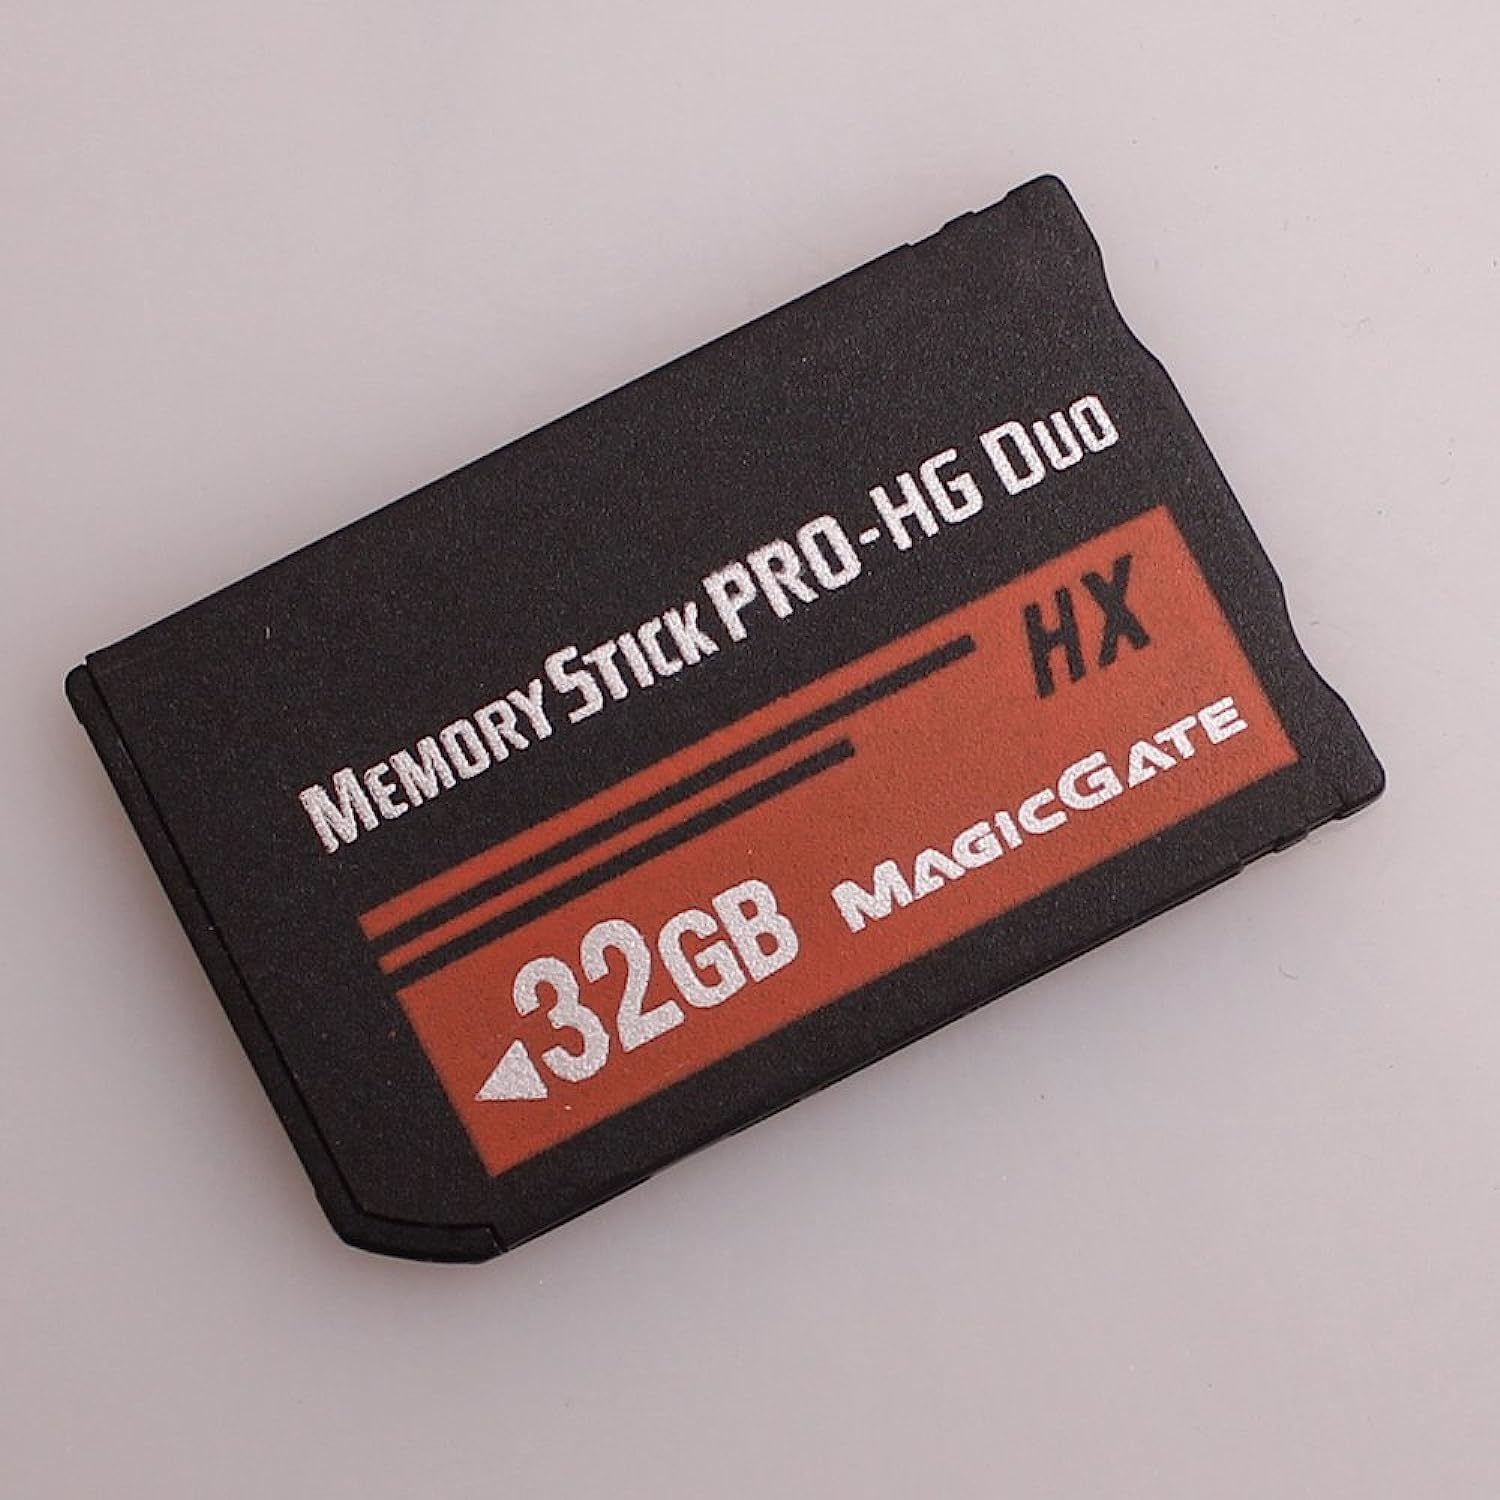 MS16GB High Speed Memory Stick Pro Duo Mark2 16gb for PSP Camera Memory  Cards